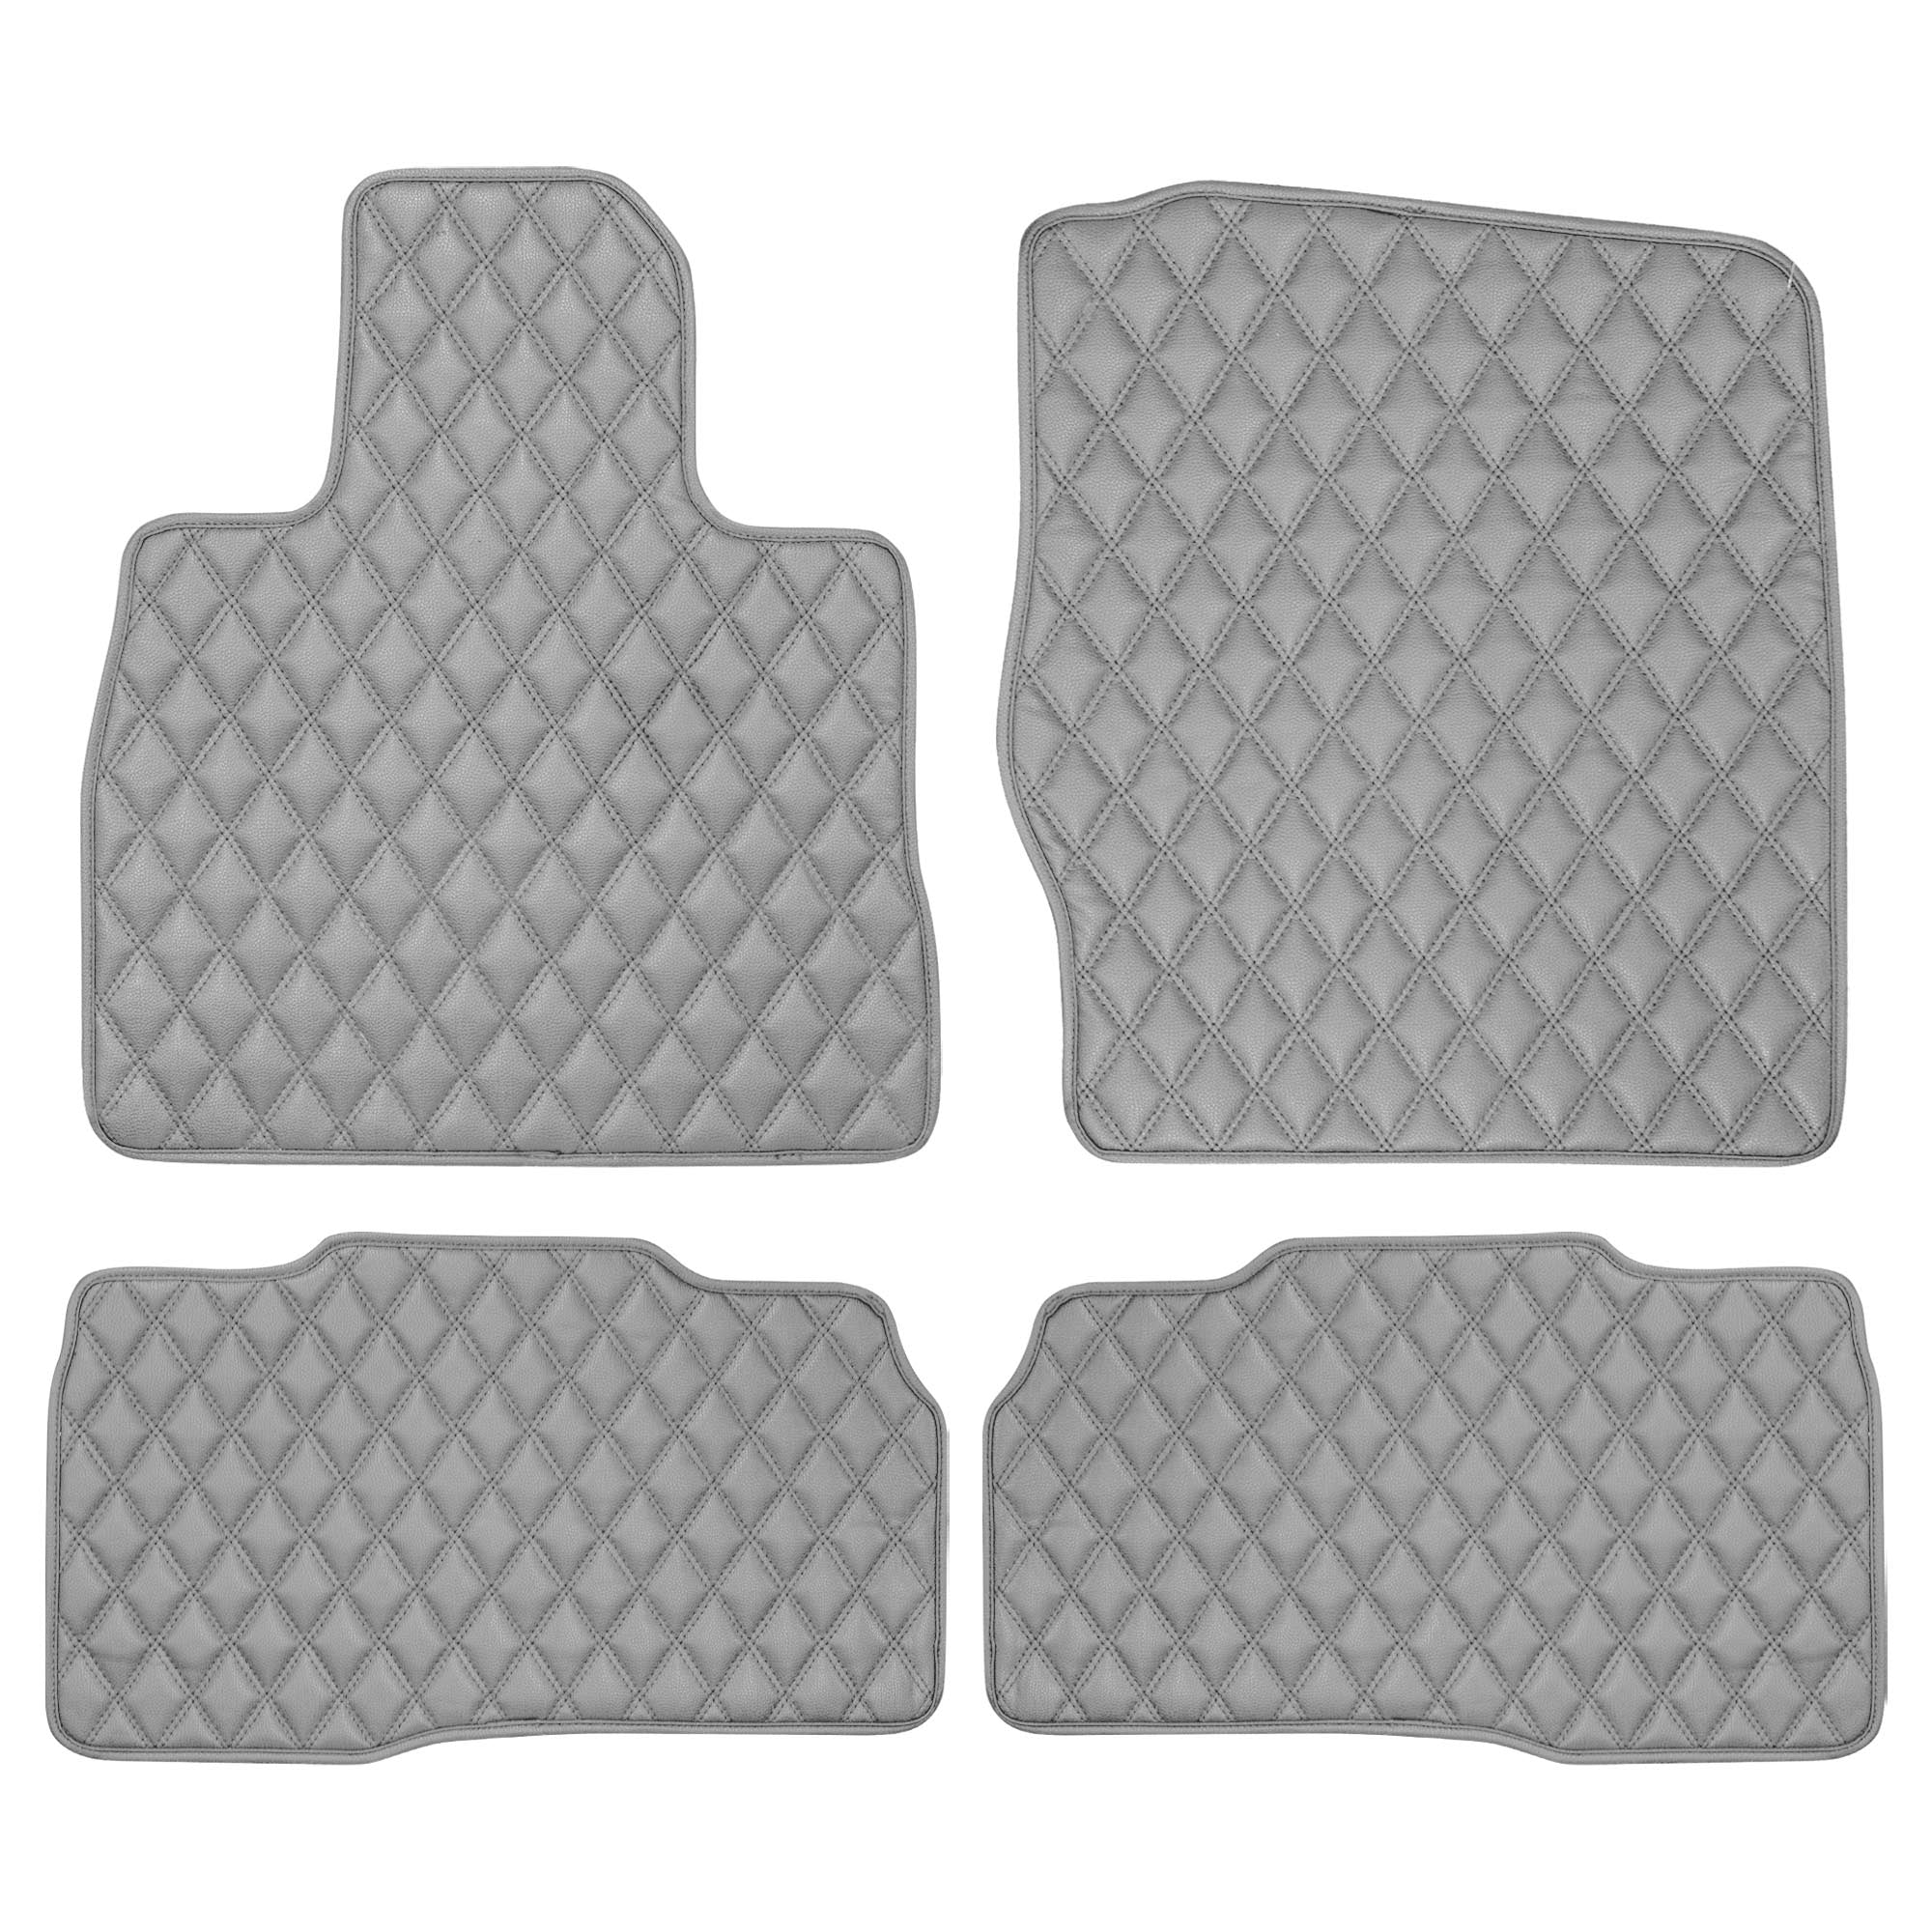 Faux Leather Custom-Fit Floor Mats for 2020-2022 Ford Explorer - Gray